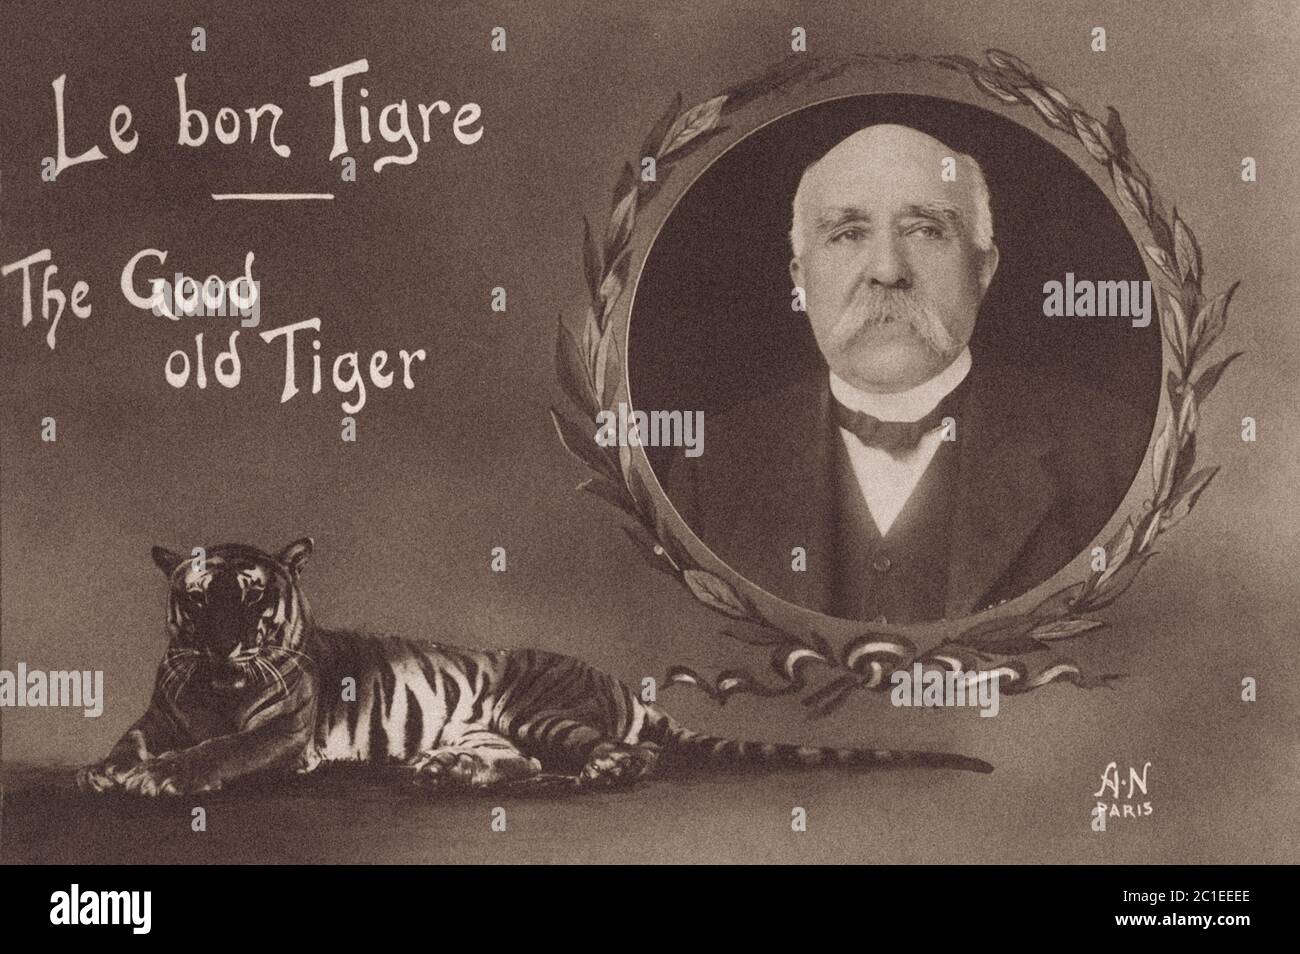 Retro postcard of Georges Clemenceau (1841 – 1929), a French statesman who served as Prime Minister of France from 1906 to 1909 and again from 1917 un Stock Photo